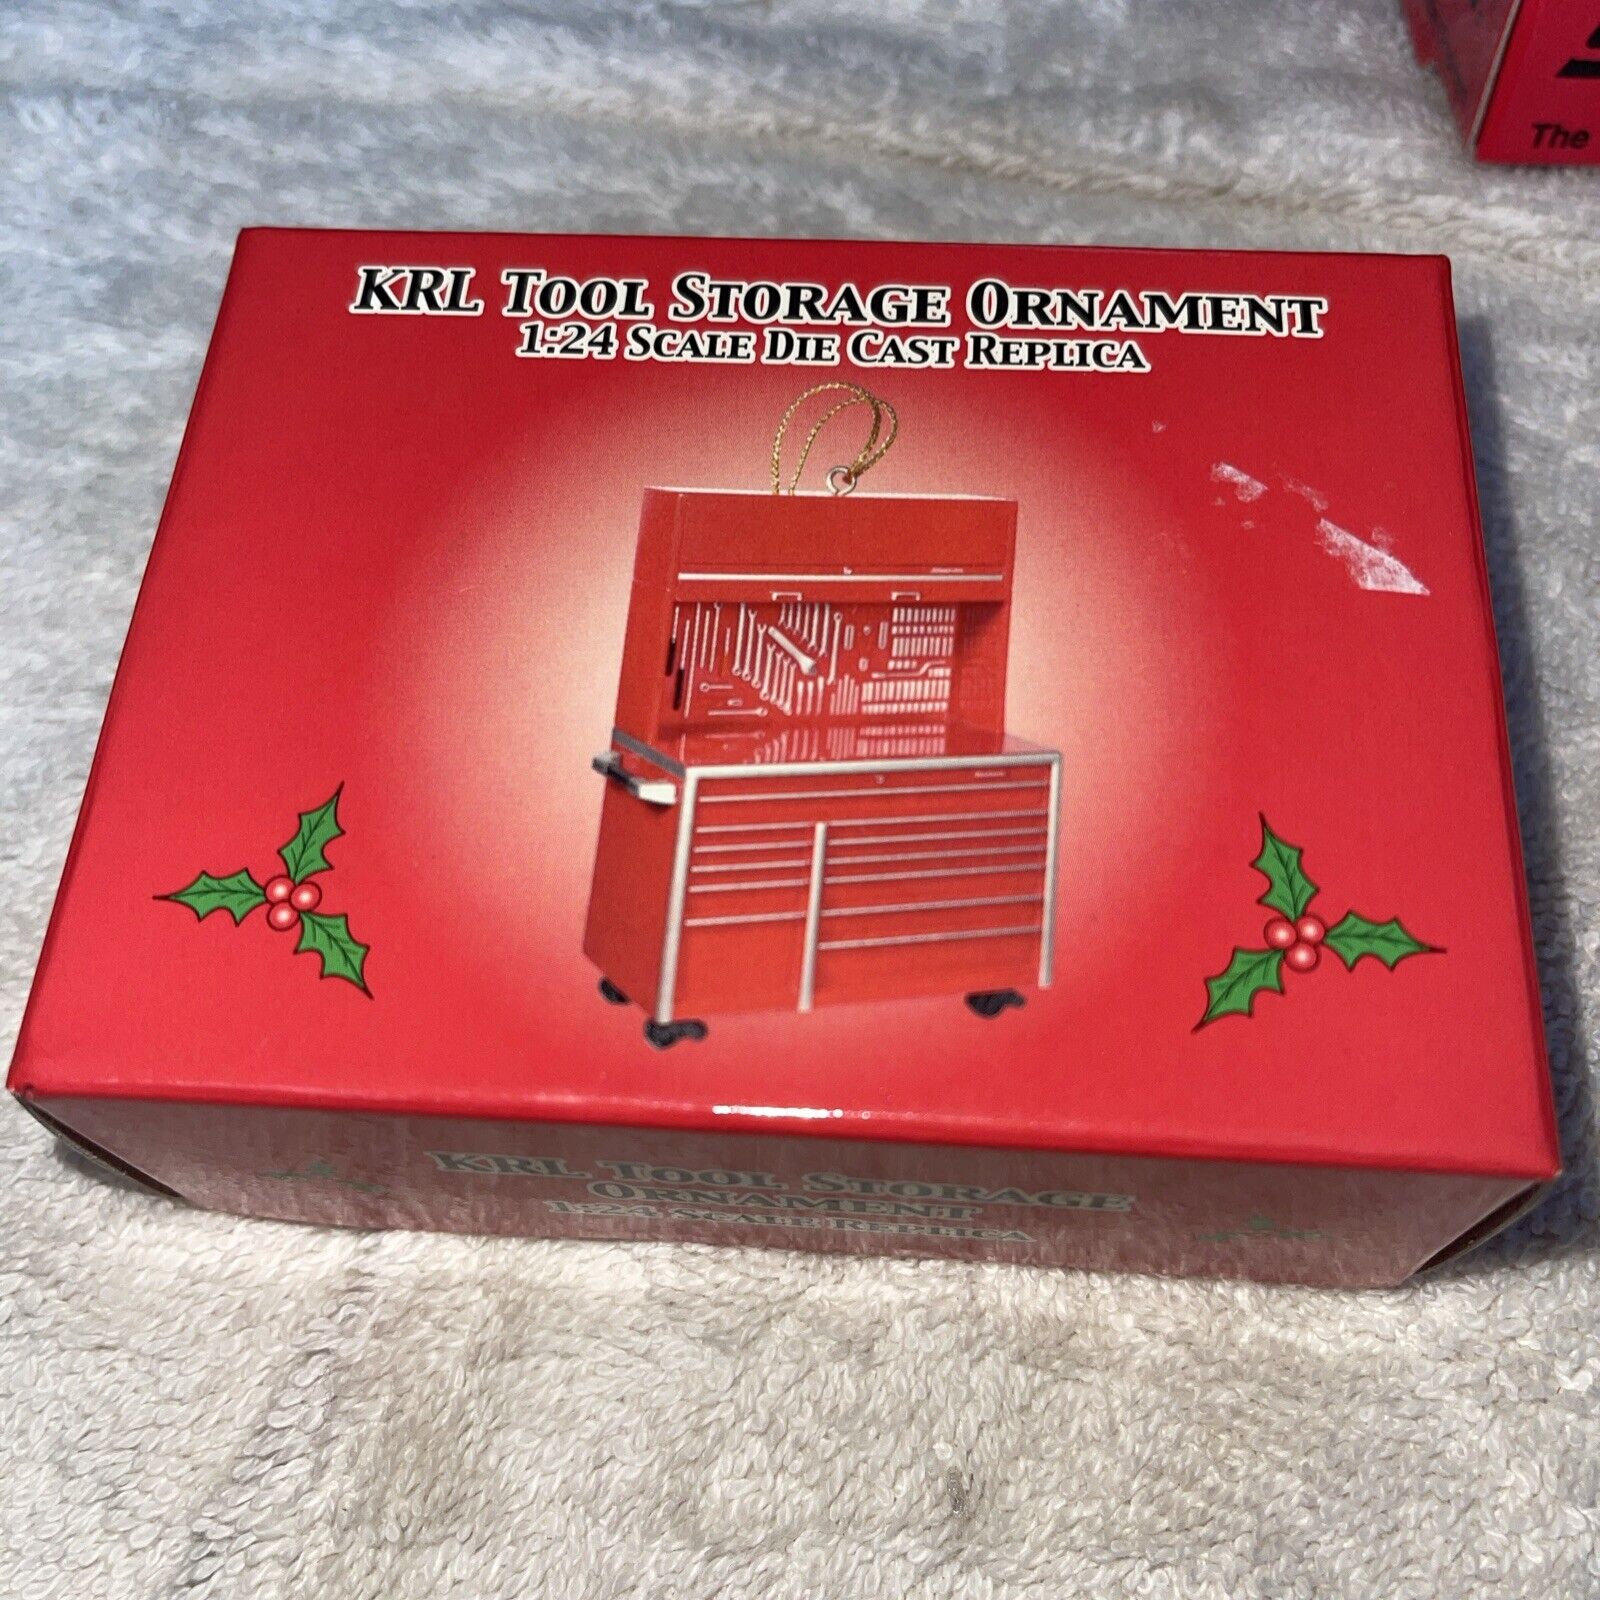 Very Rare KRL Snap-on The Tool Storage Holiday Ornament 1:24 Scale